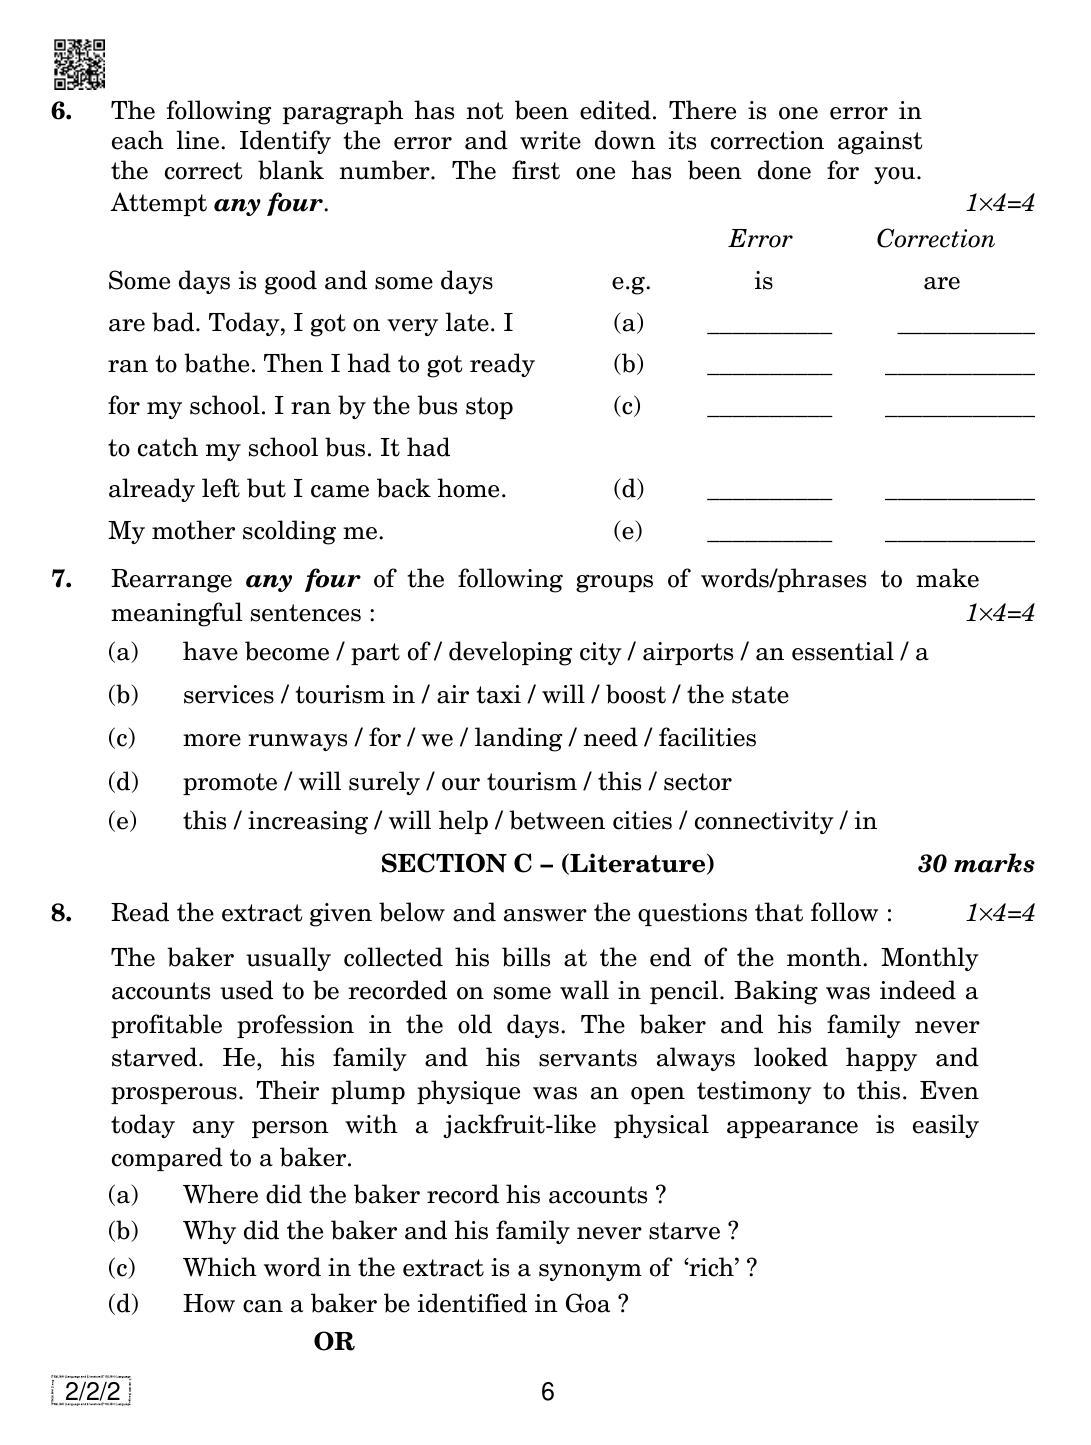 CBSE Class 10 2-2-2  ENGLISH LANGUAGE AND LETERATURE 2019 Question Paper - Page 6